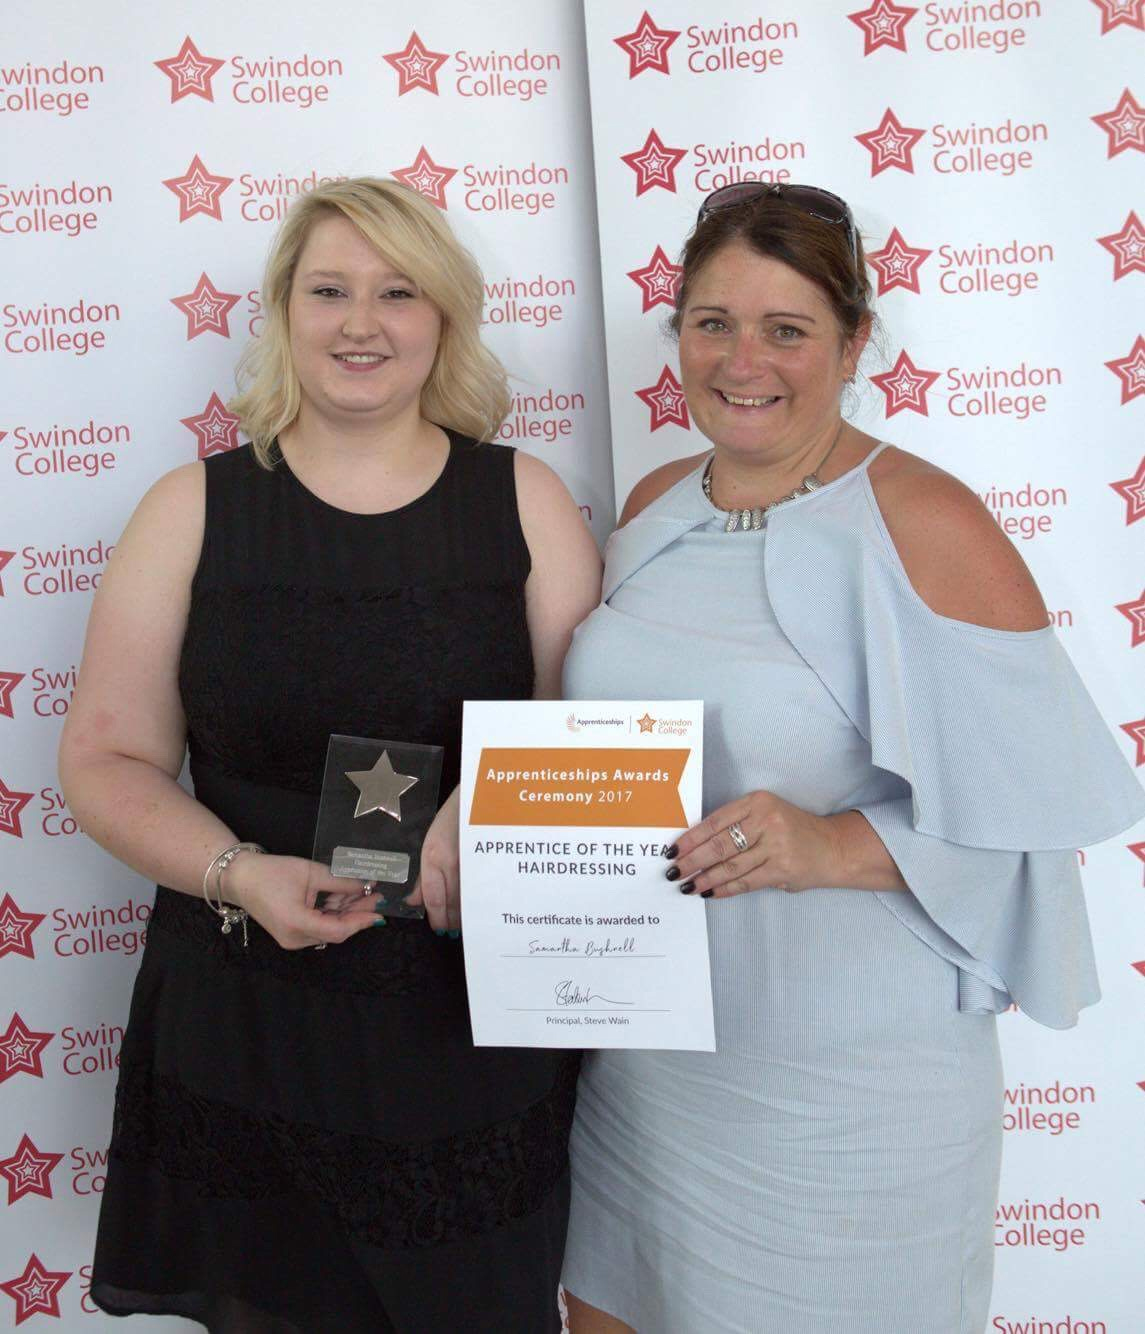 Swindon College Apprentice of the Year, Sam Bushnell, with Segais owner, Charlotte Woodley